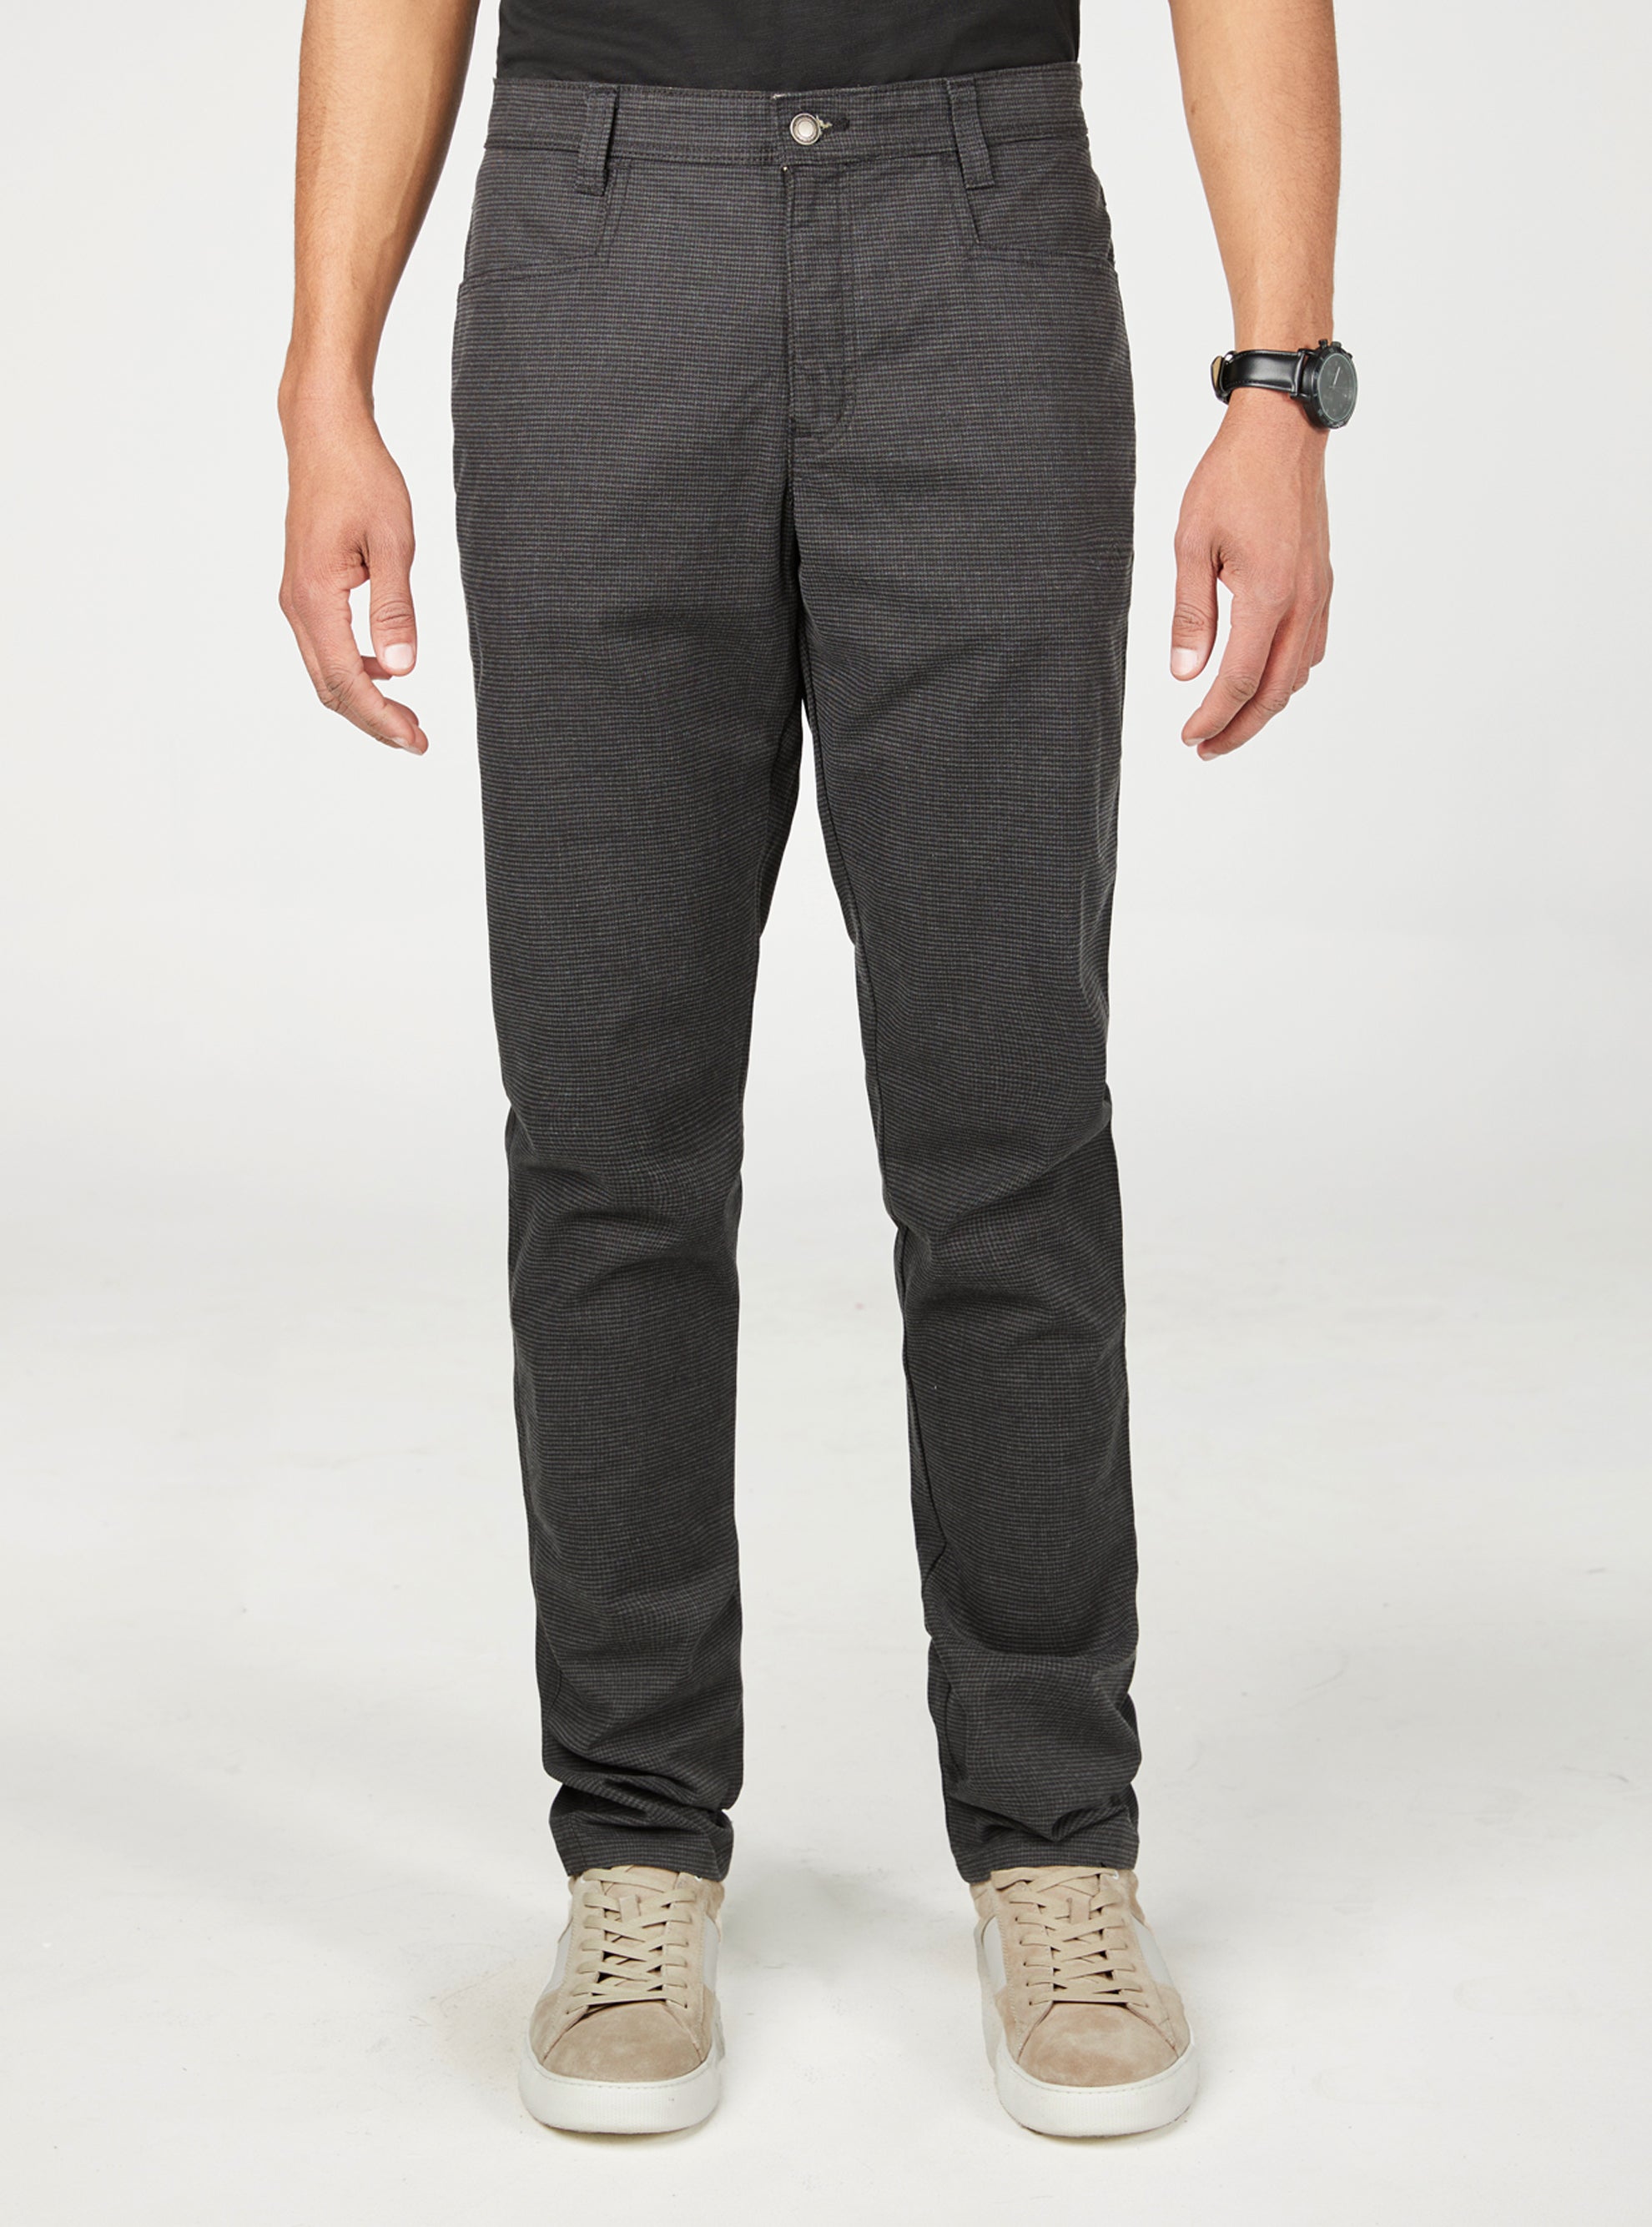 Gray jeans style casual pants